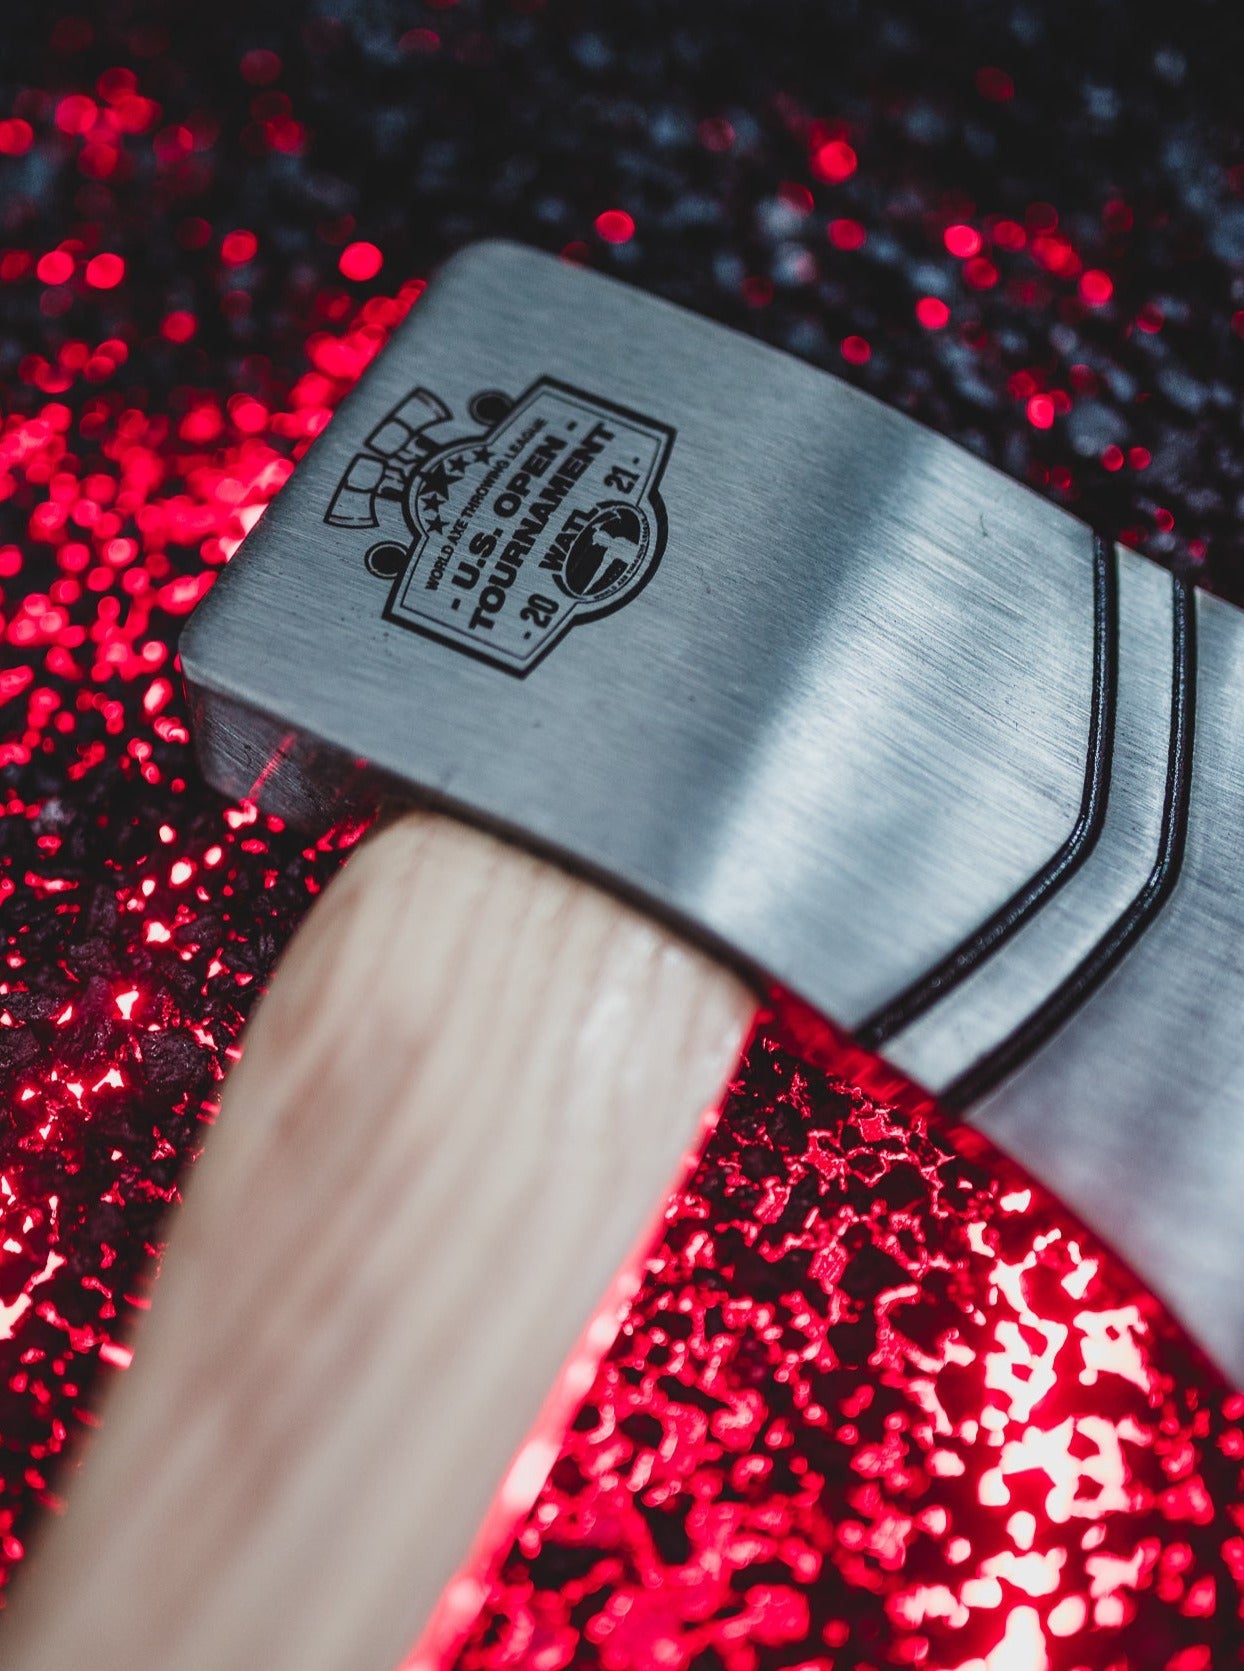 Throwing Axe With 2021 US Open Engraving by World Axe Throwing League